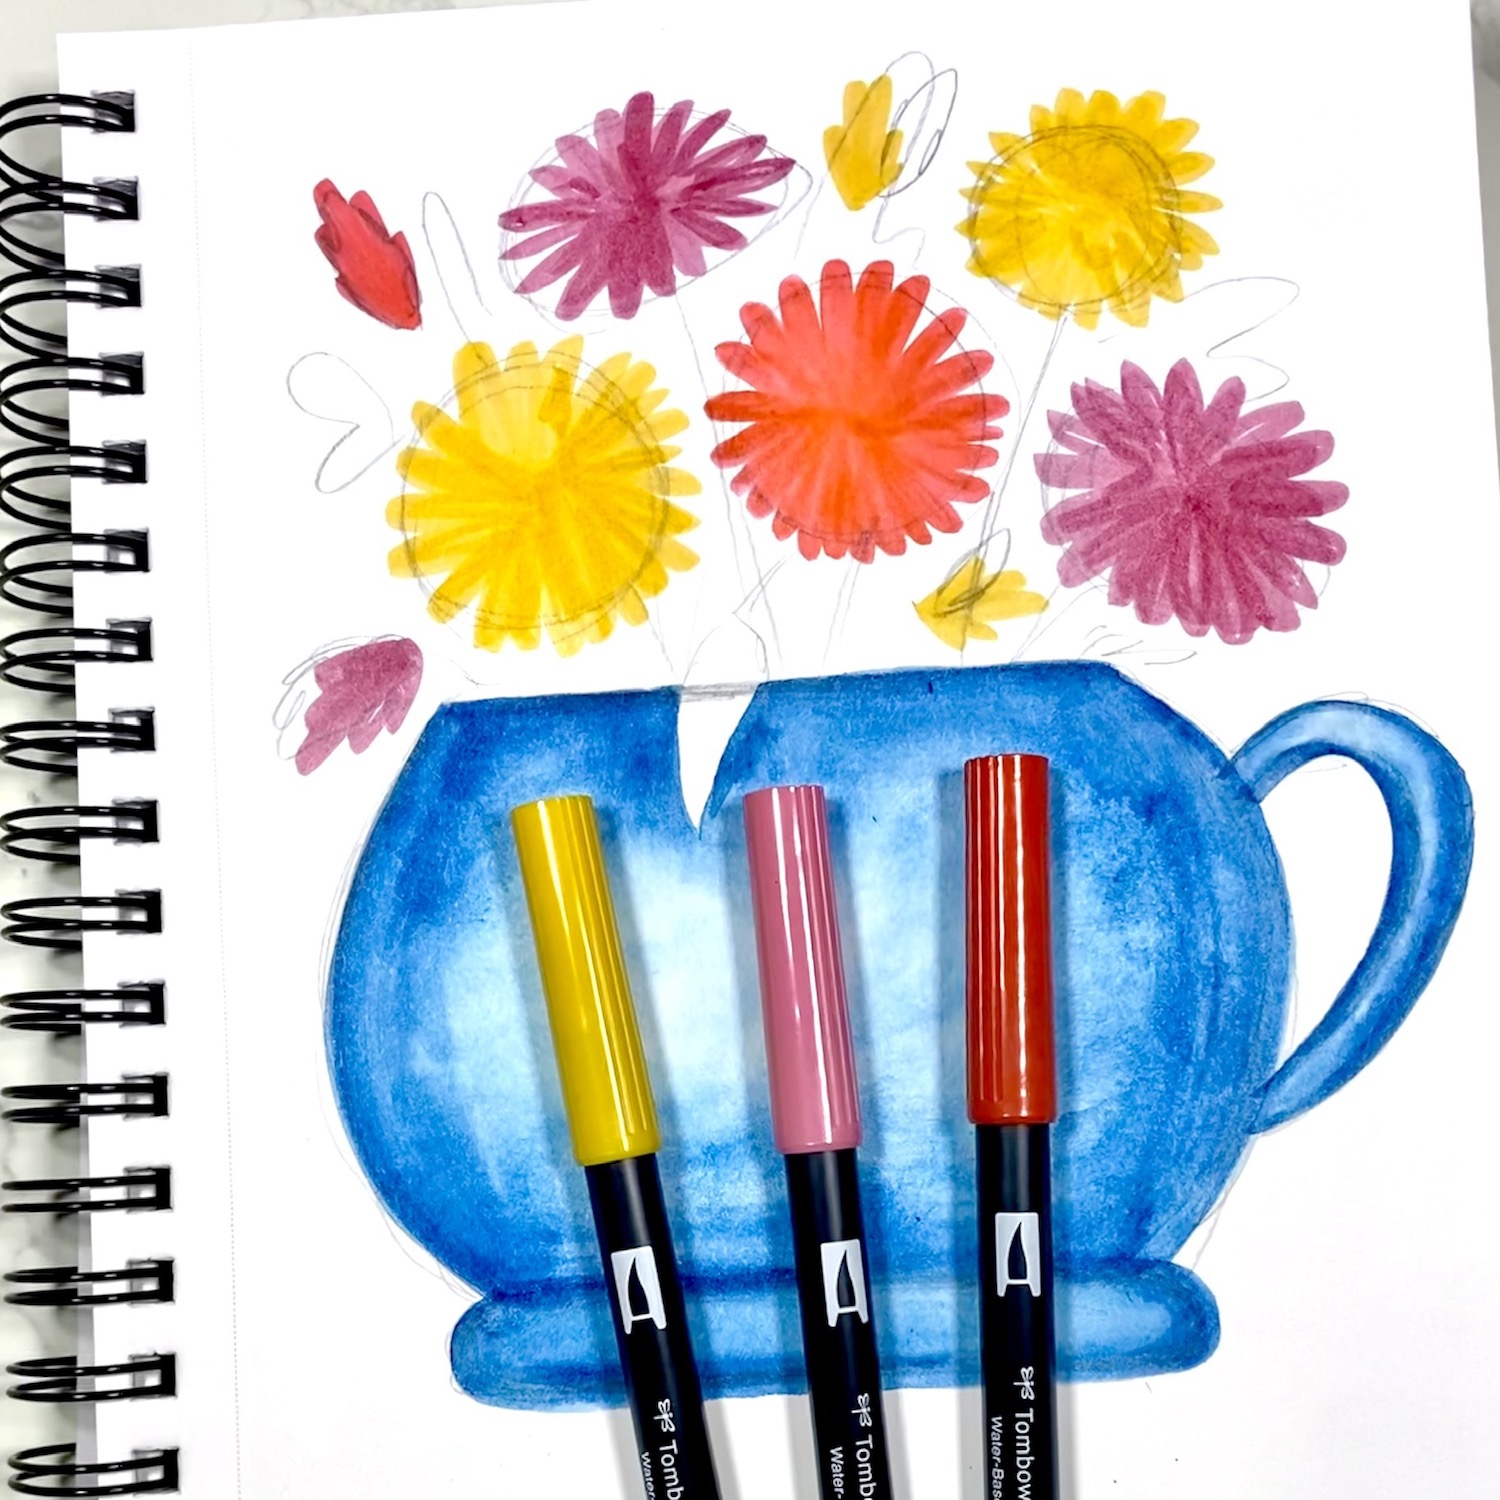 Floral Watercolor Art Inspired By Clementine Hunter - Marcella Astore